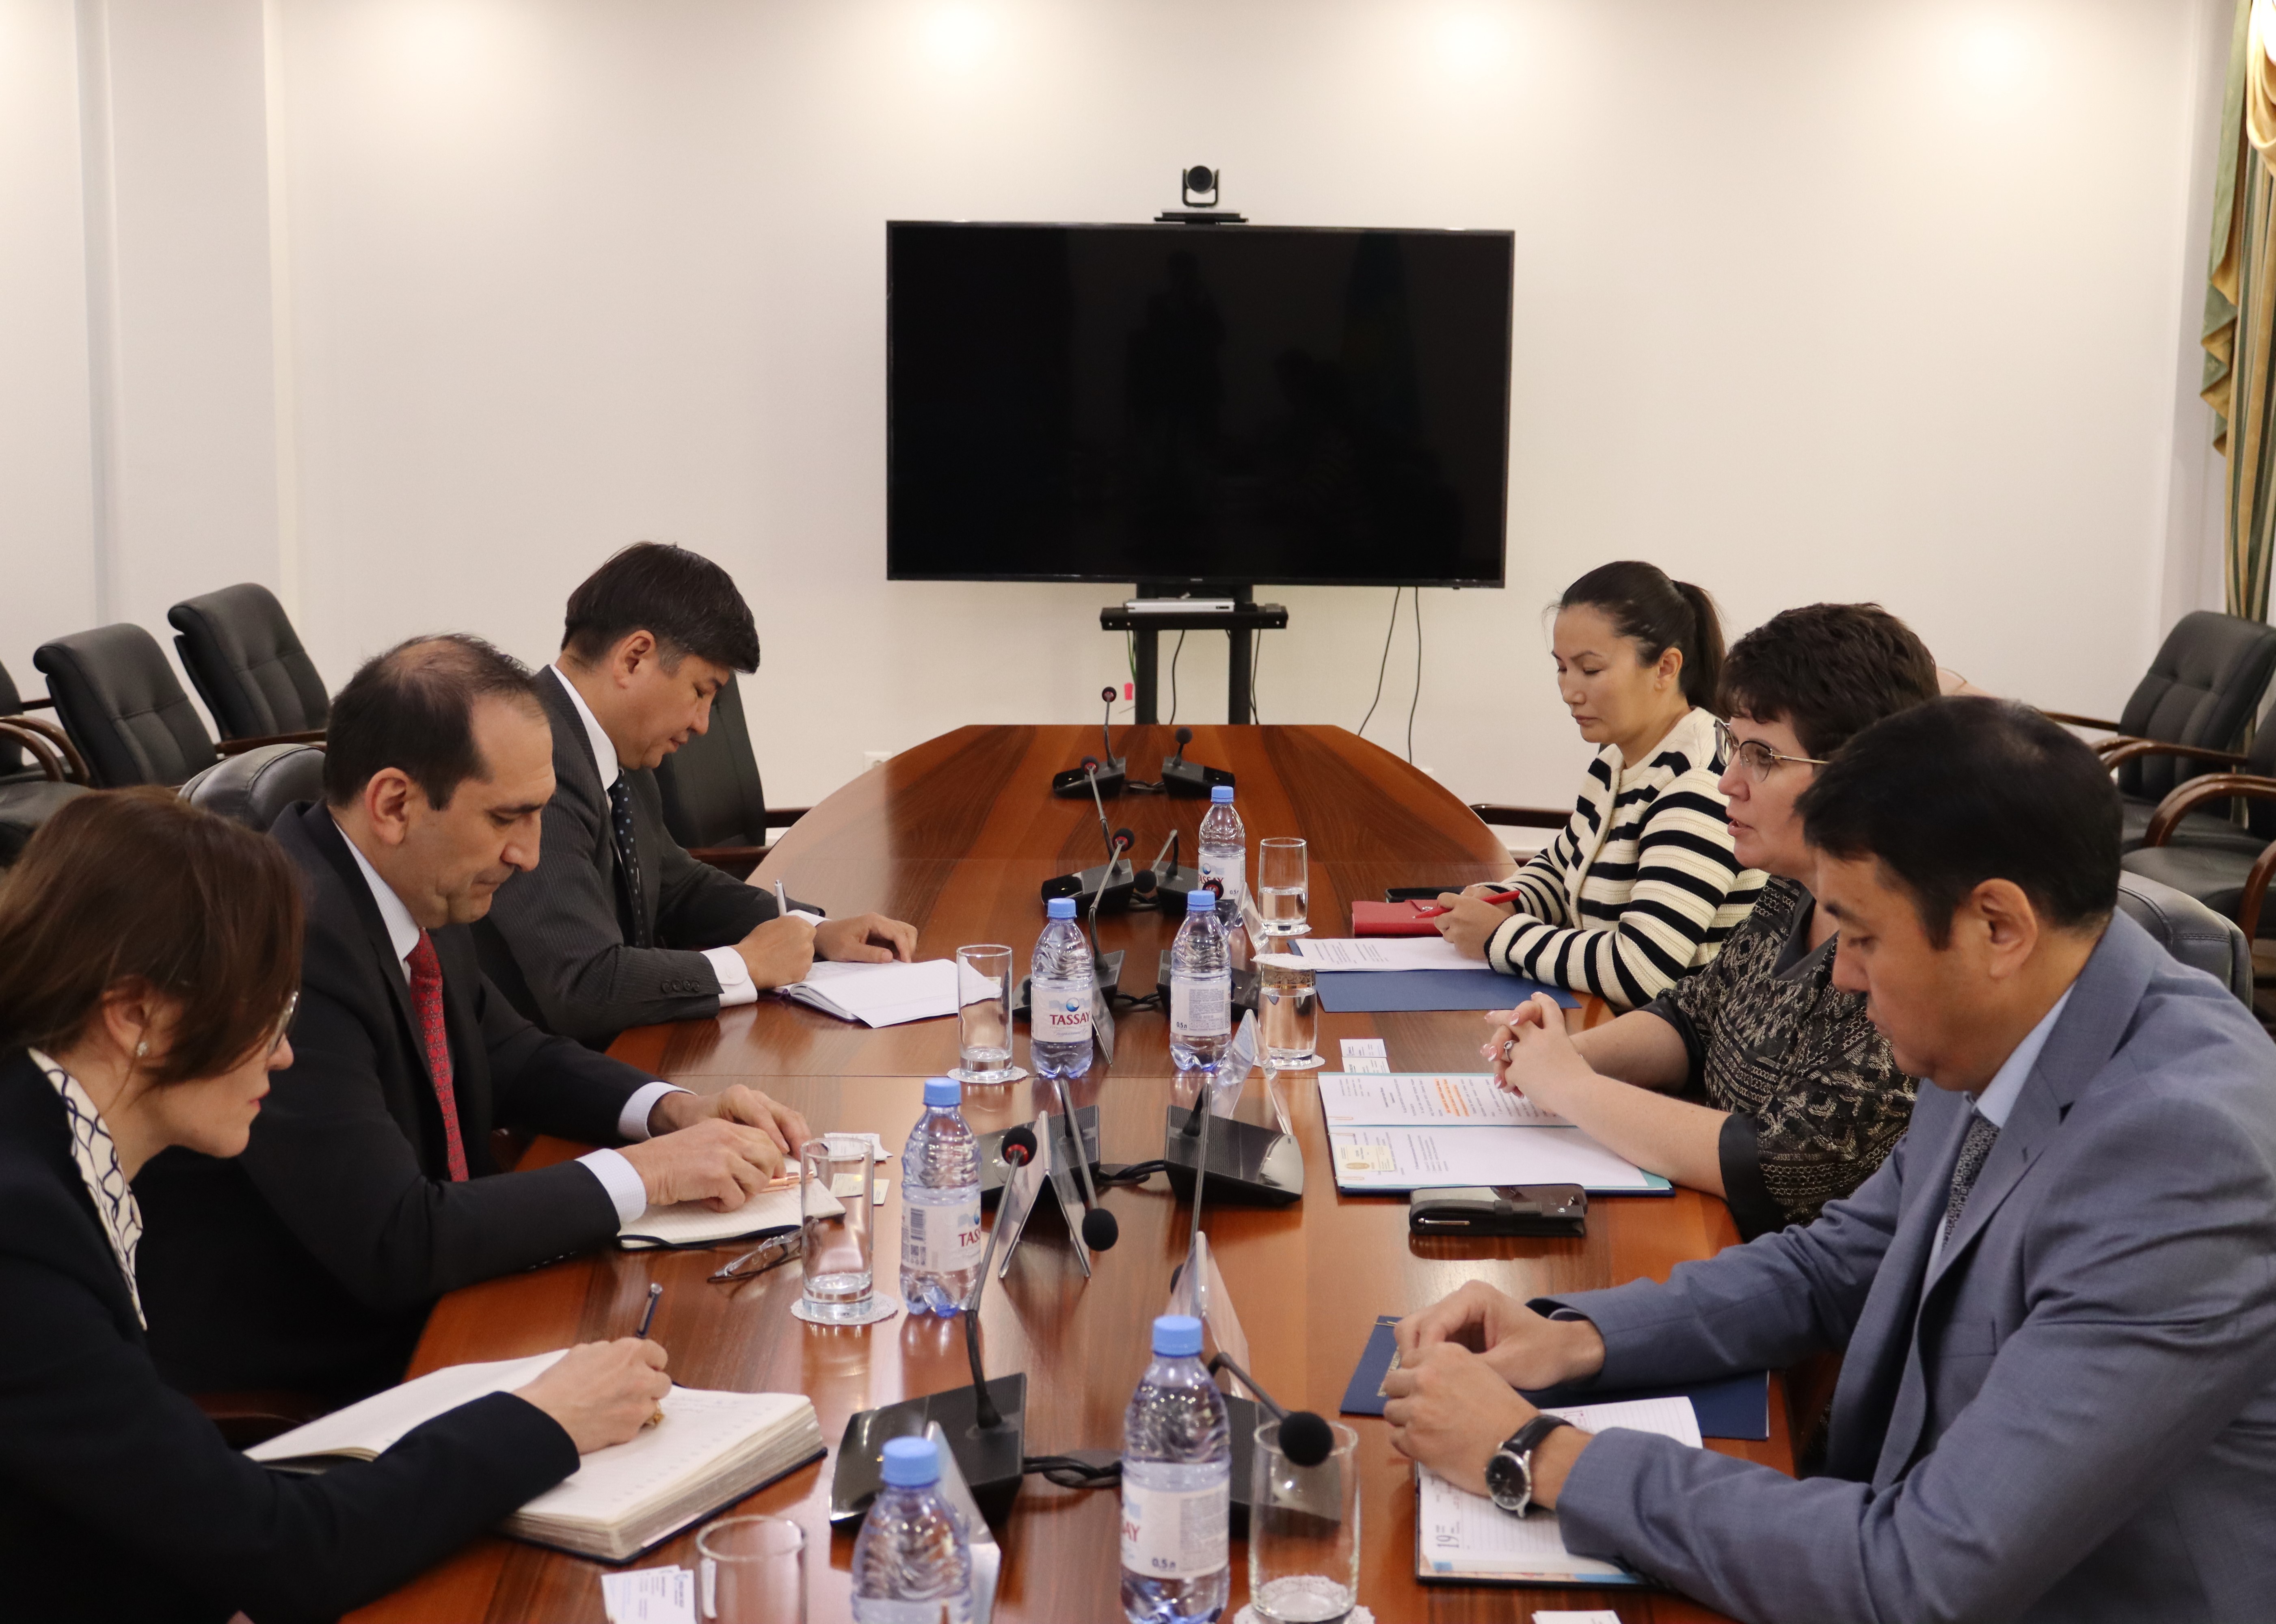 The Head of the Supreme Audit Institution of Kazakhstan met with representatives of the Asian Development Bank and the World Bank